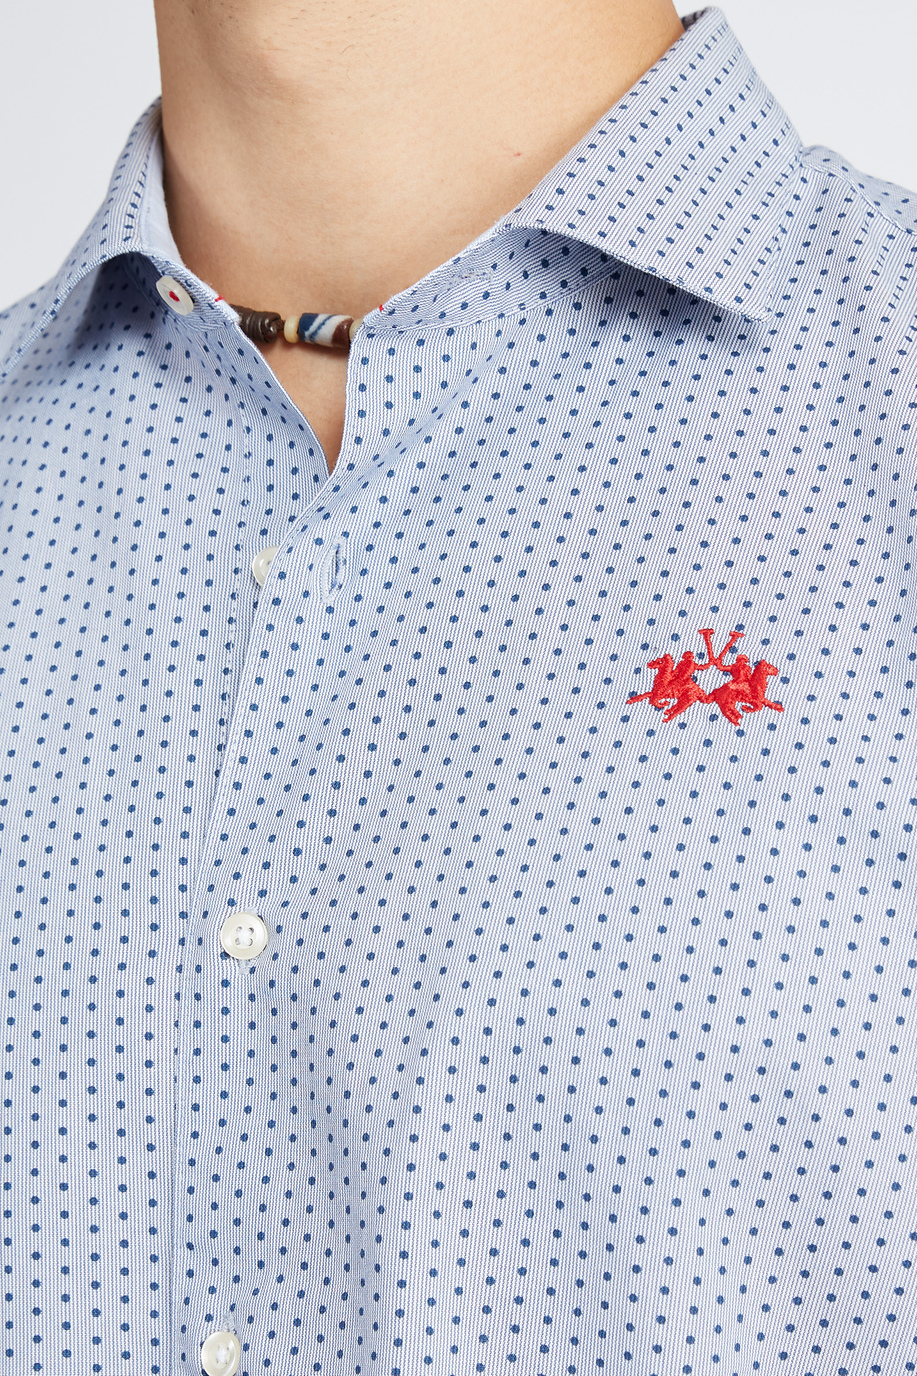 Polo Academy men's capsule long-sleeved shirt with polka dot pattern and small logo - Vachel - Gift ideas for him | La Martina - Official Online Shop